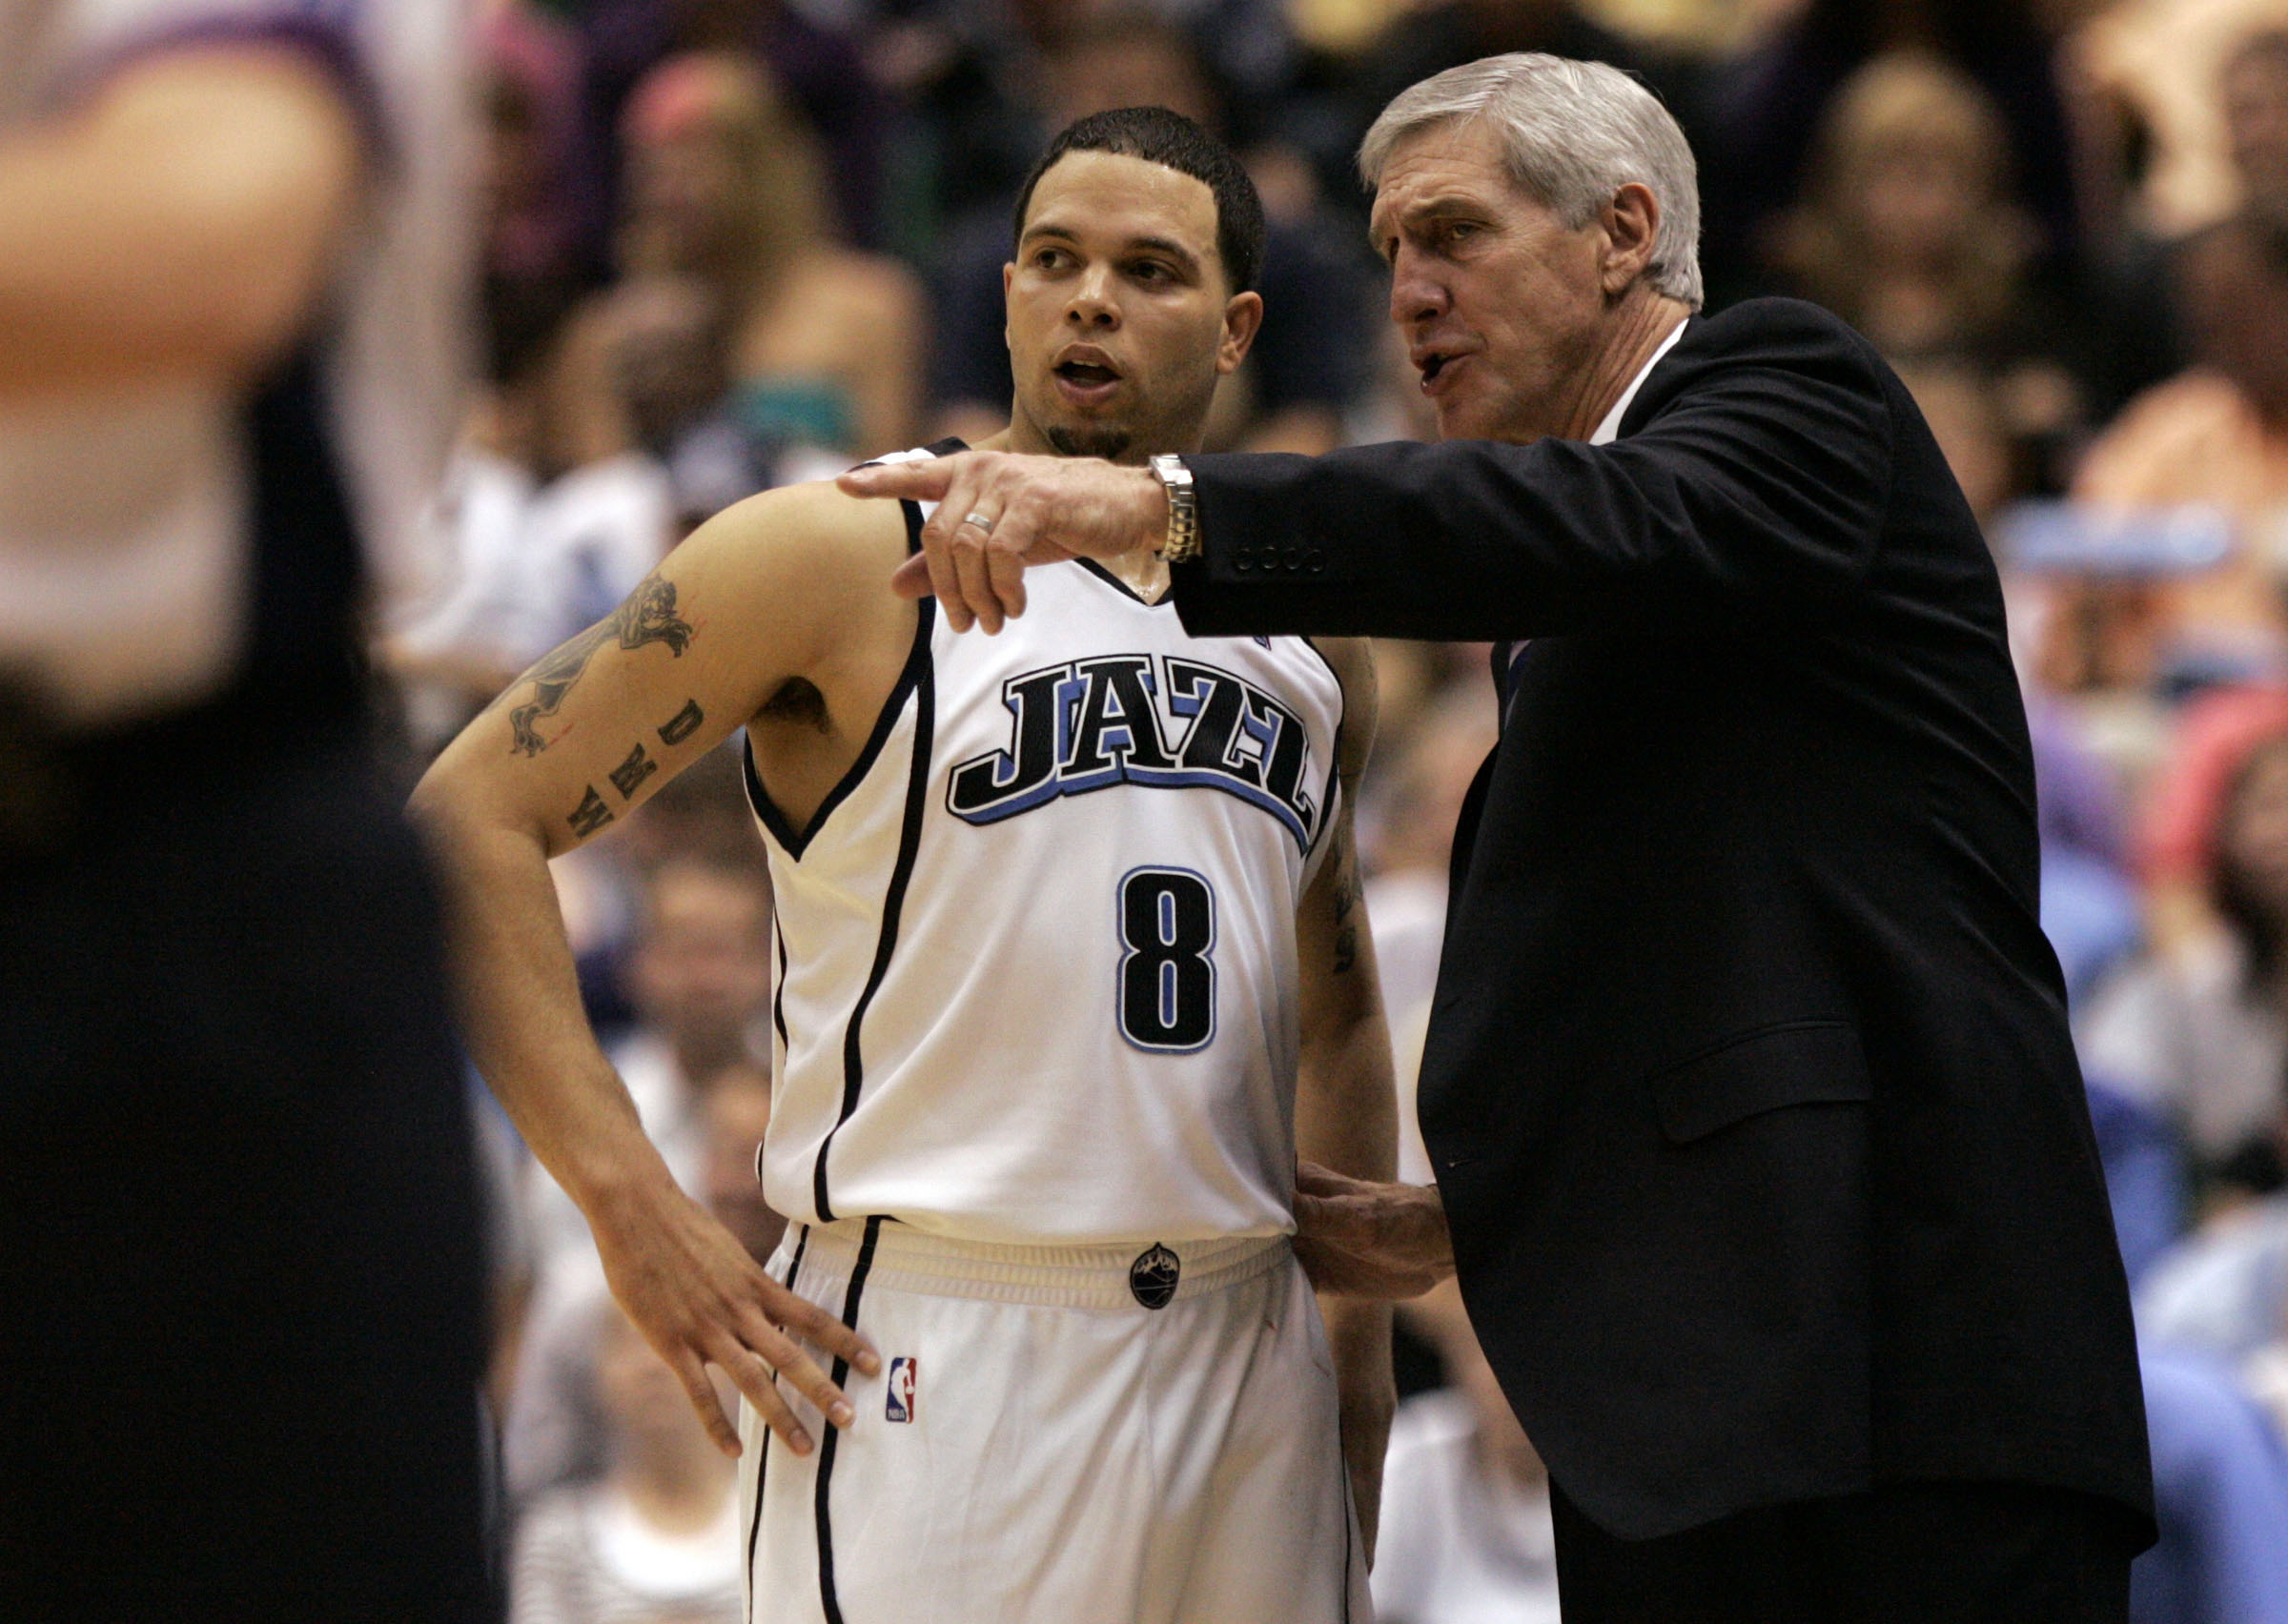 Raja Bell explains why Utah Jazz coach Jerry Sloan was one of his